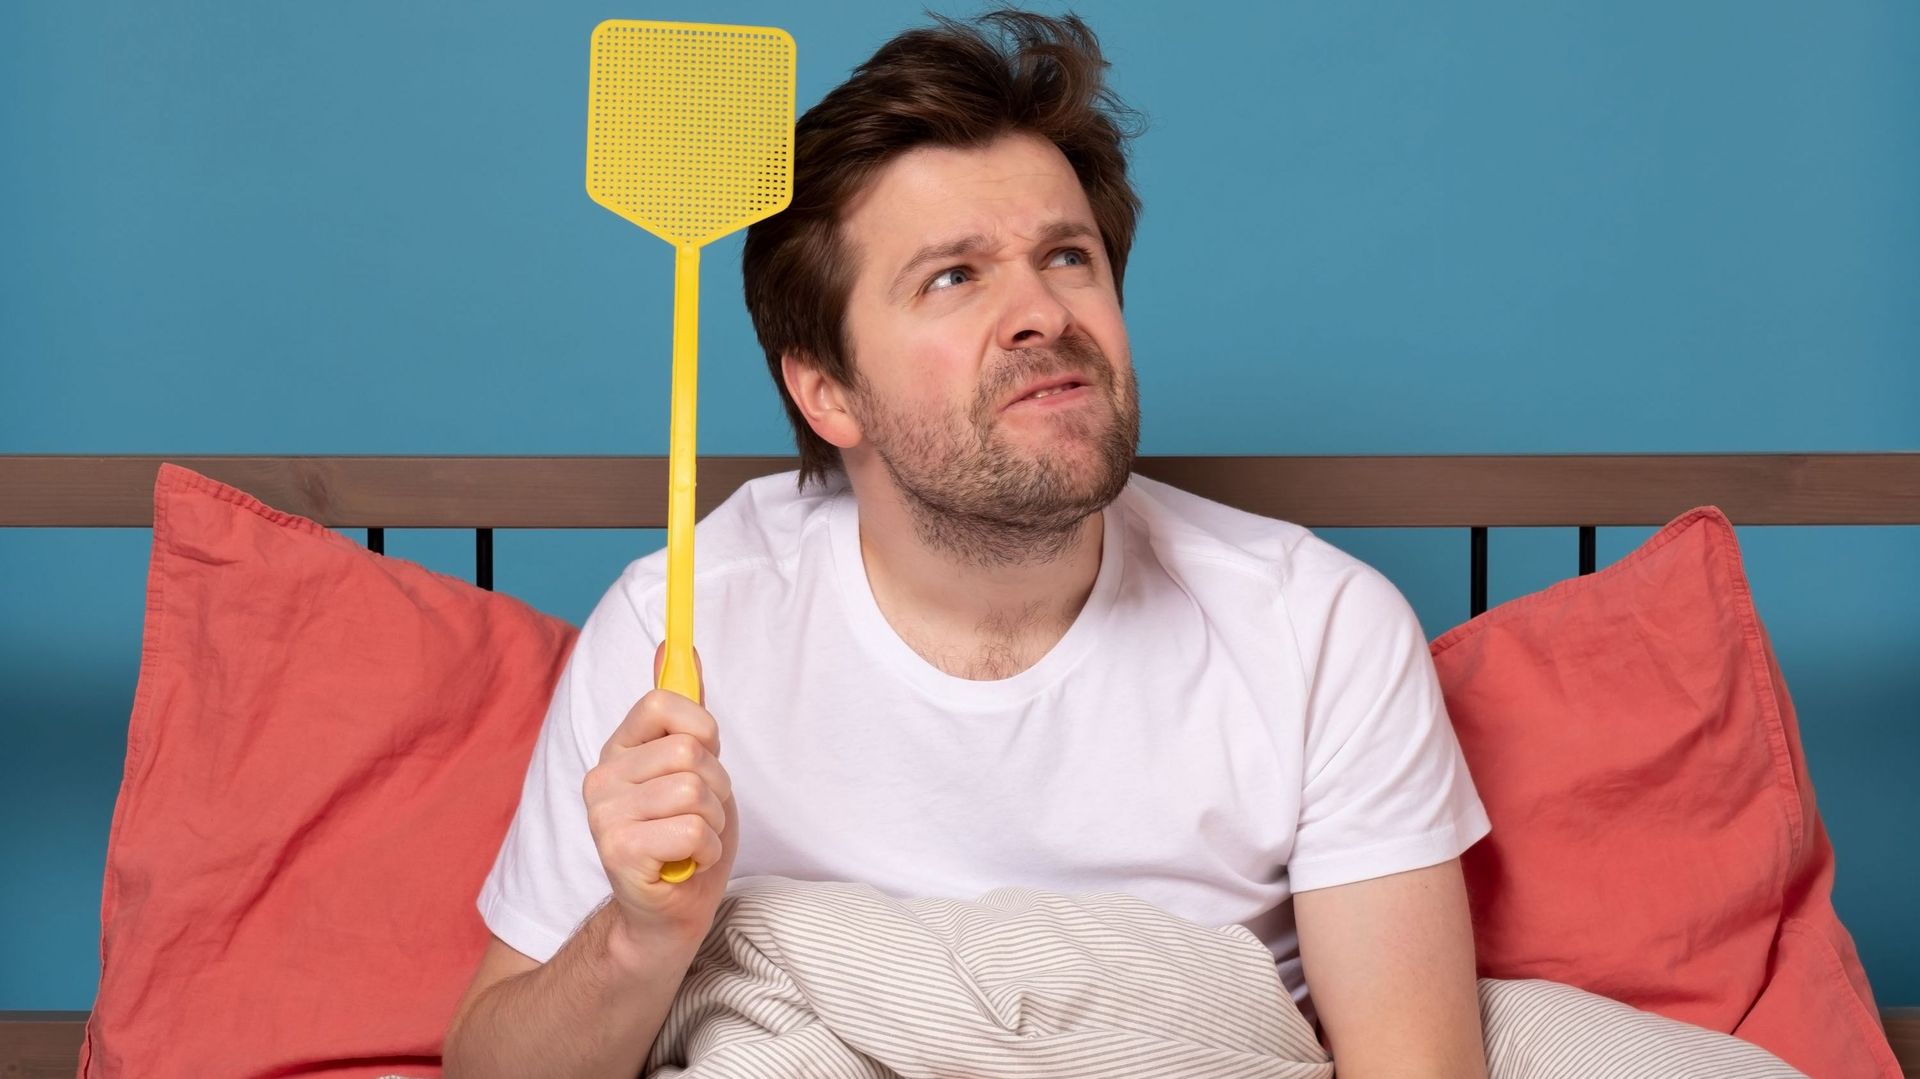 man holding a fly swatter wanting to kill annoying mosquito